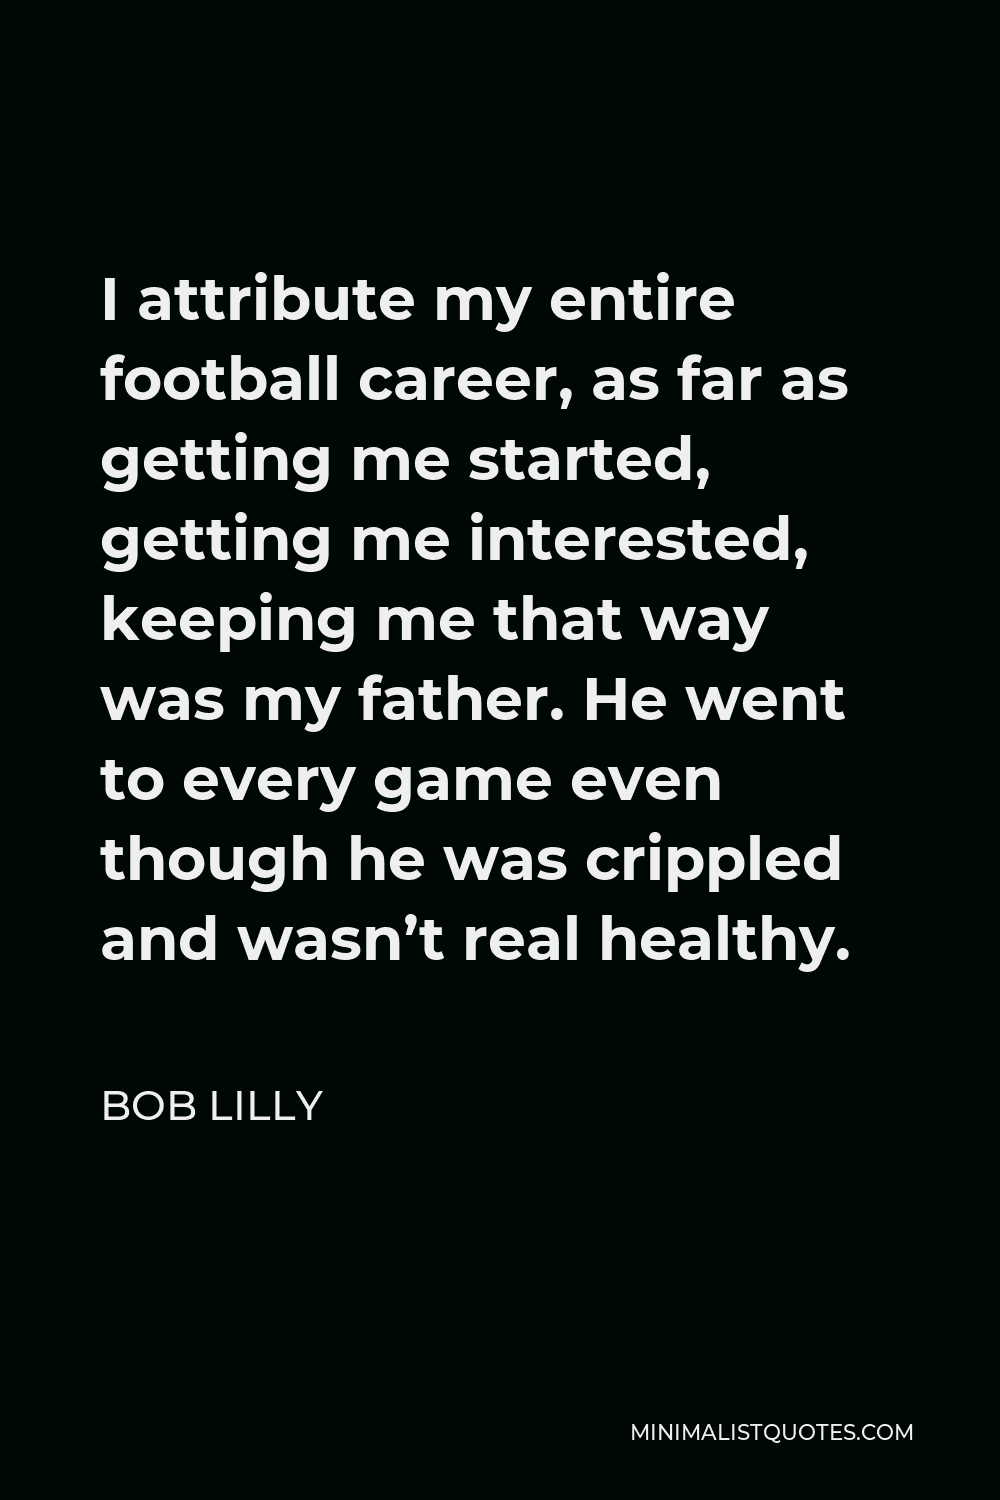 Bob Lilly Quote - I attribute my entire football career, as far as getting me started, getting me interested, keeping me that way was my father. He went to every game even though he was crippled and wasn’t real healthy.